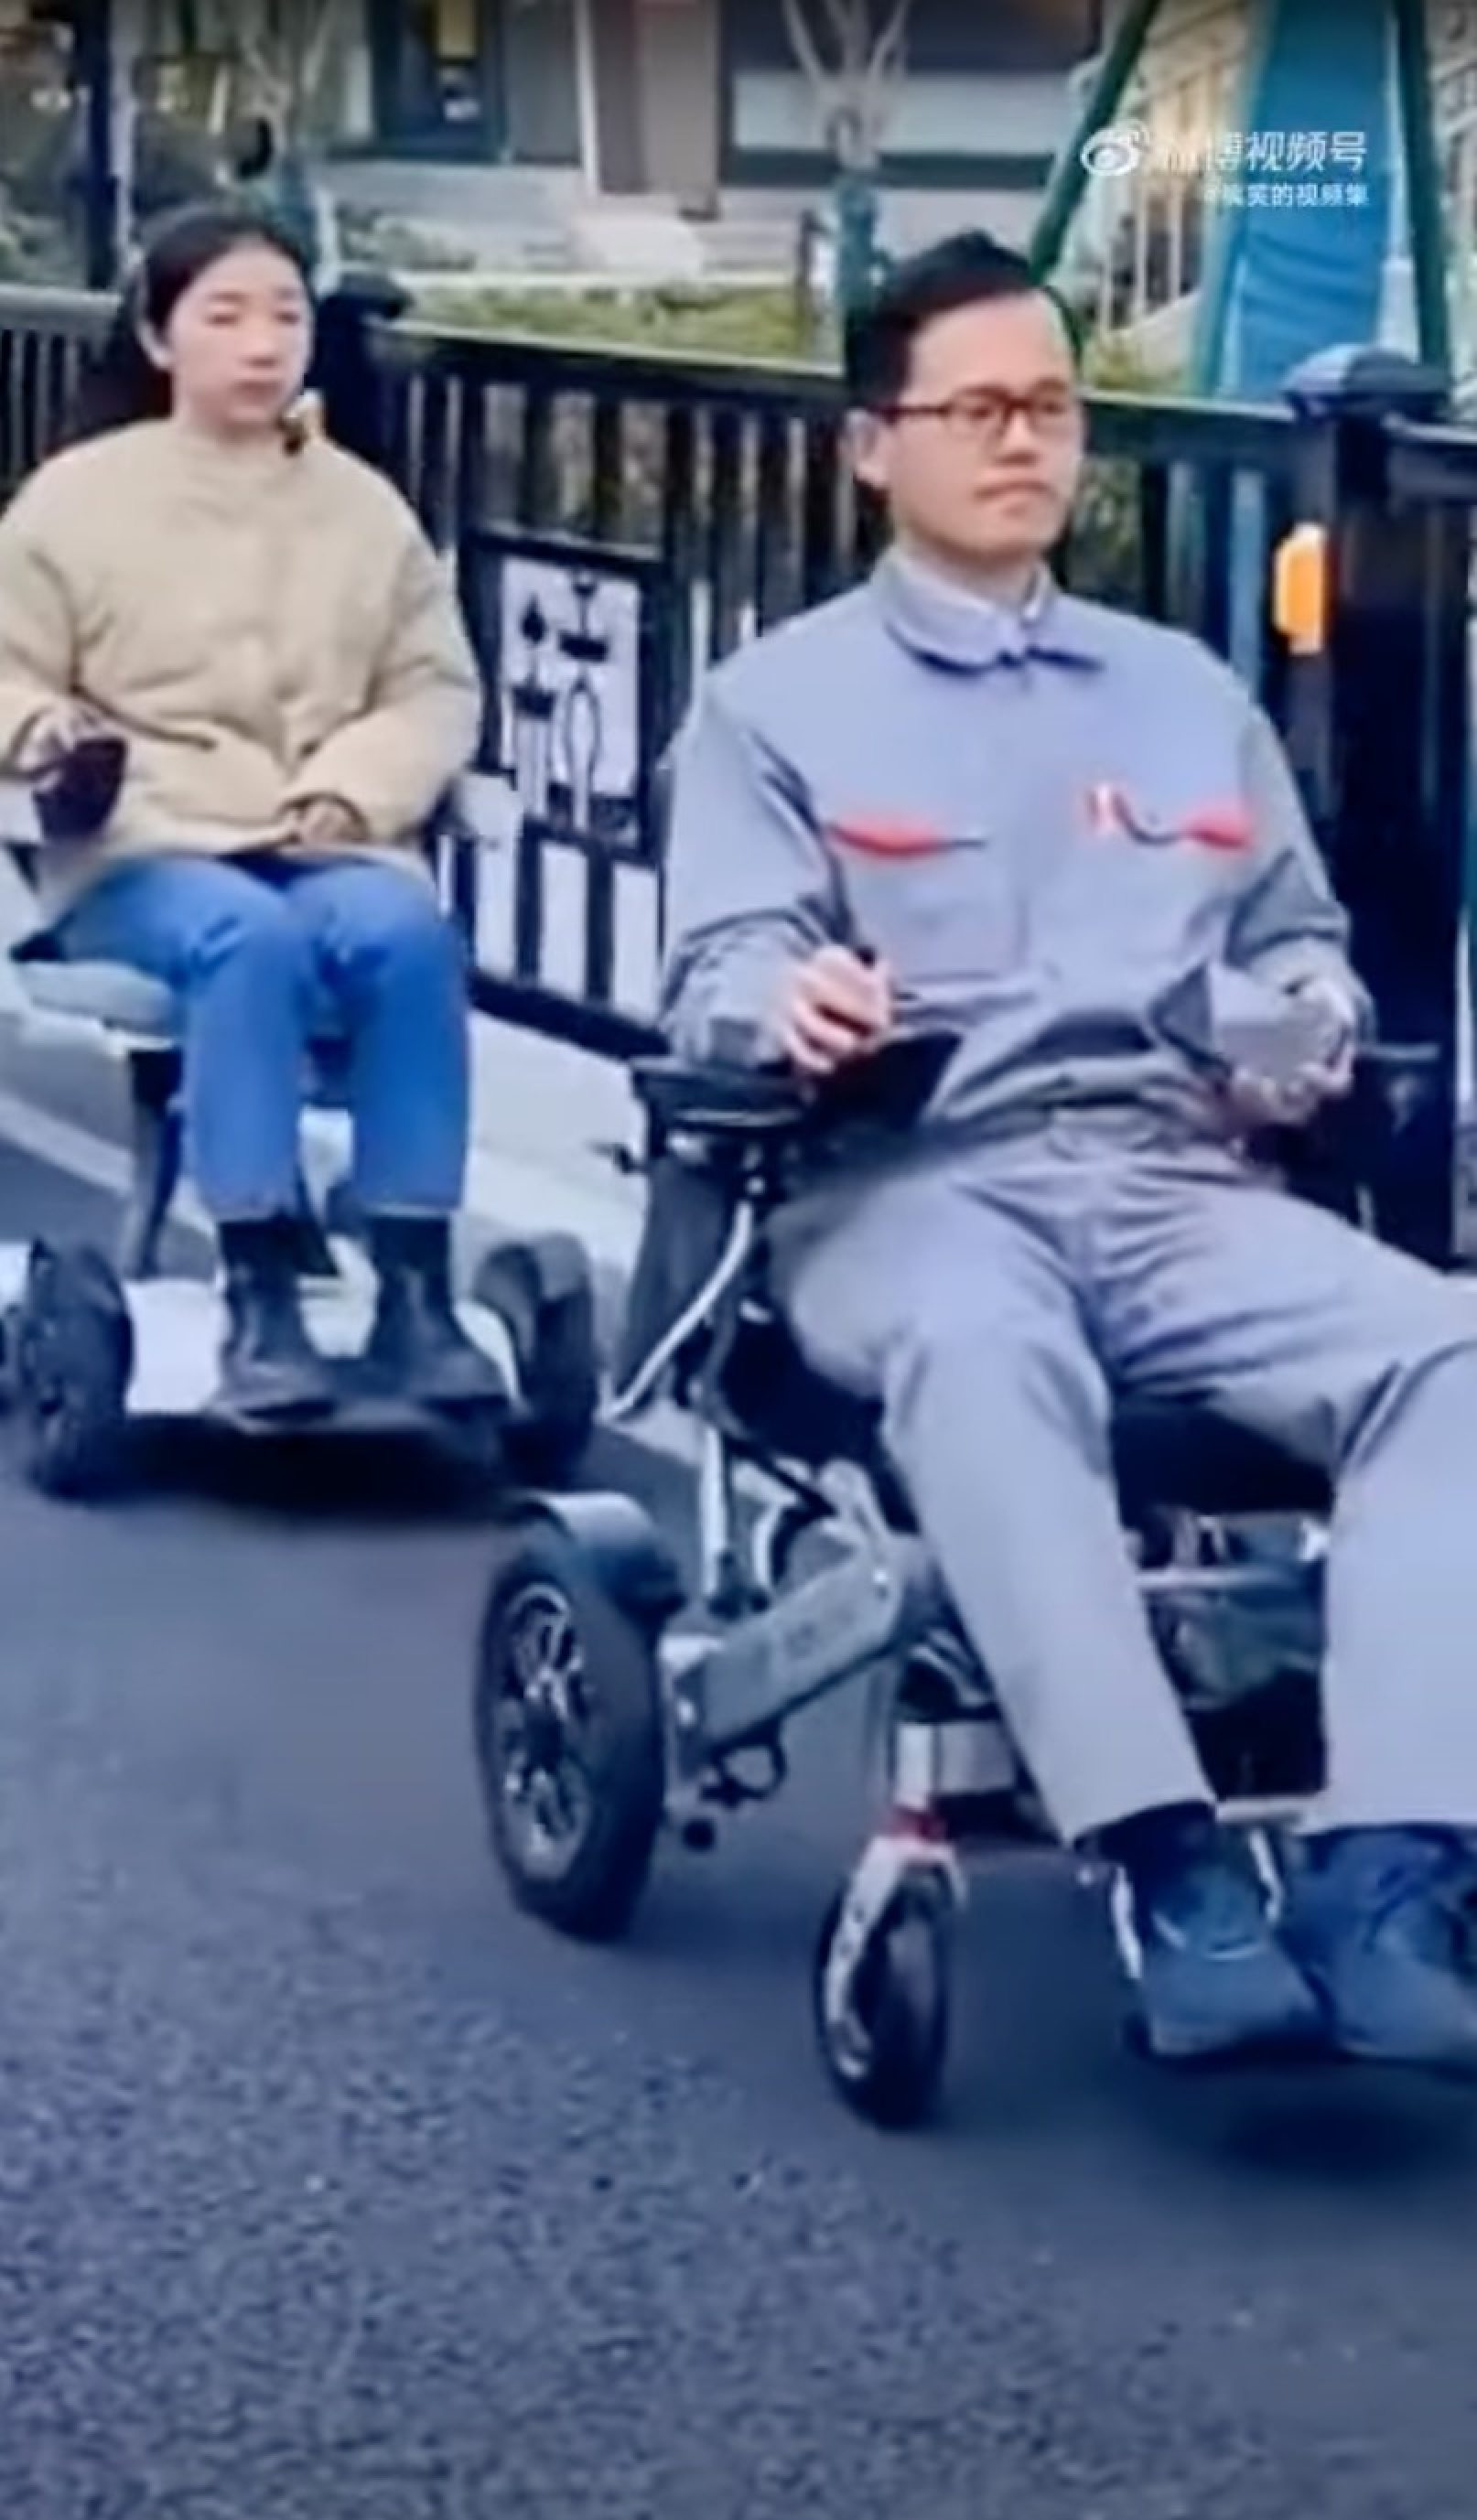 Some online observers have labelled able-bodied people who commute to work in electric wheelchairs as “sick”. Photo: YouTube/@videoupper